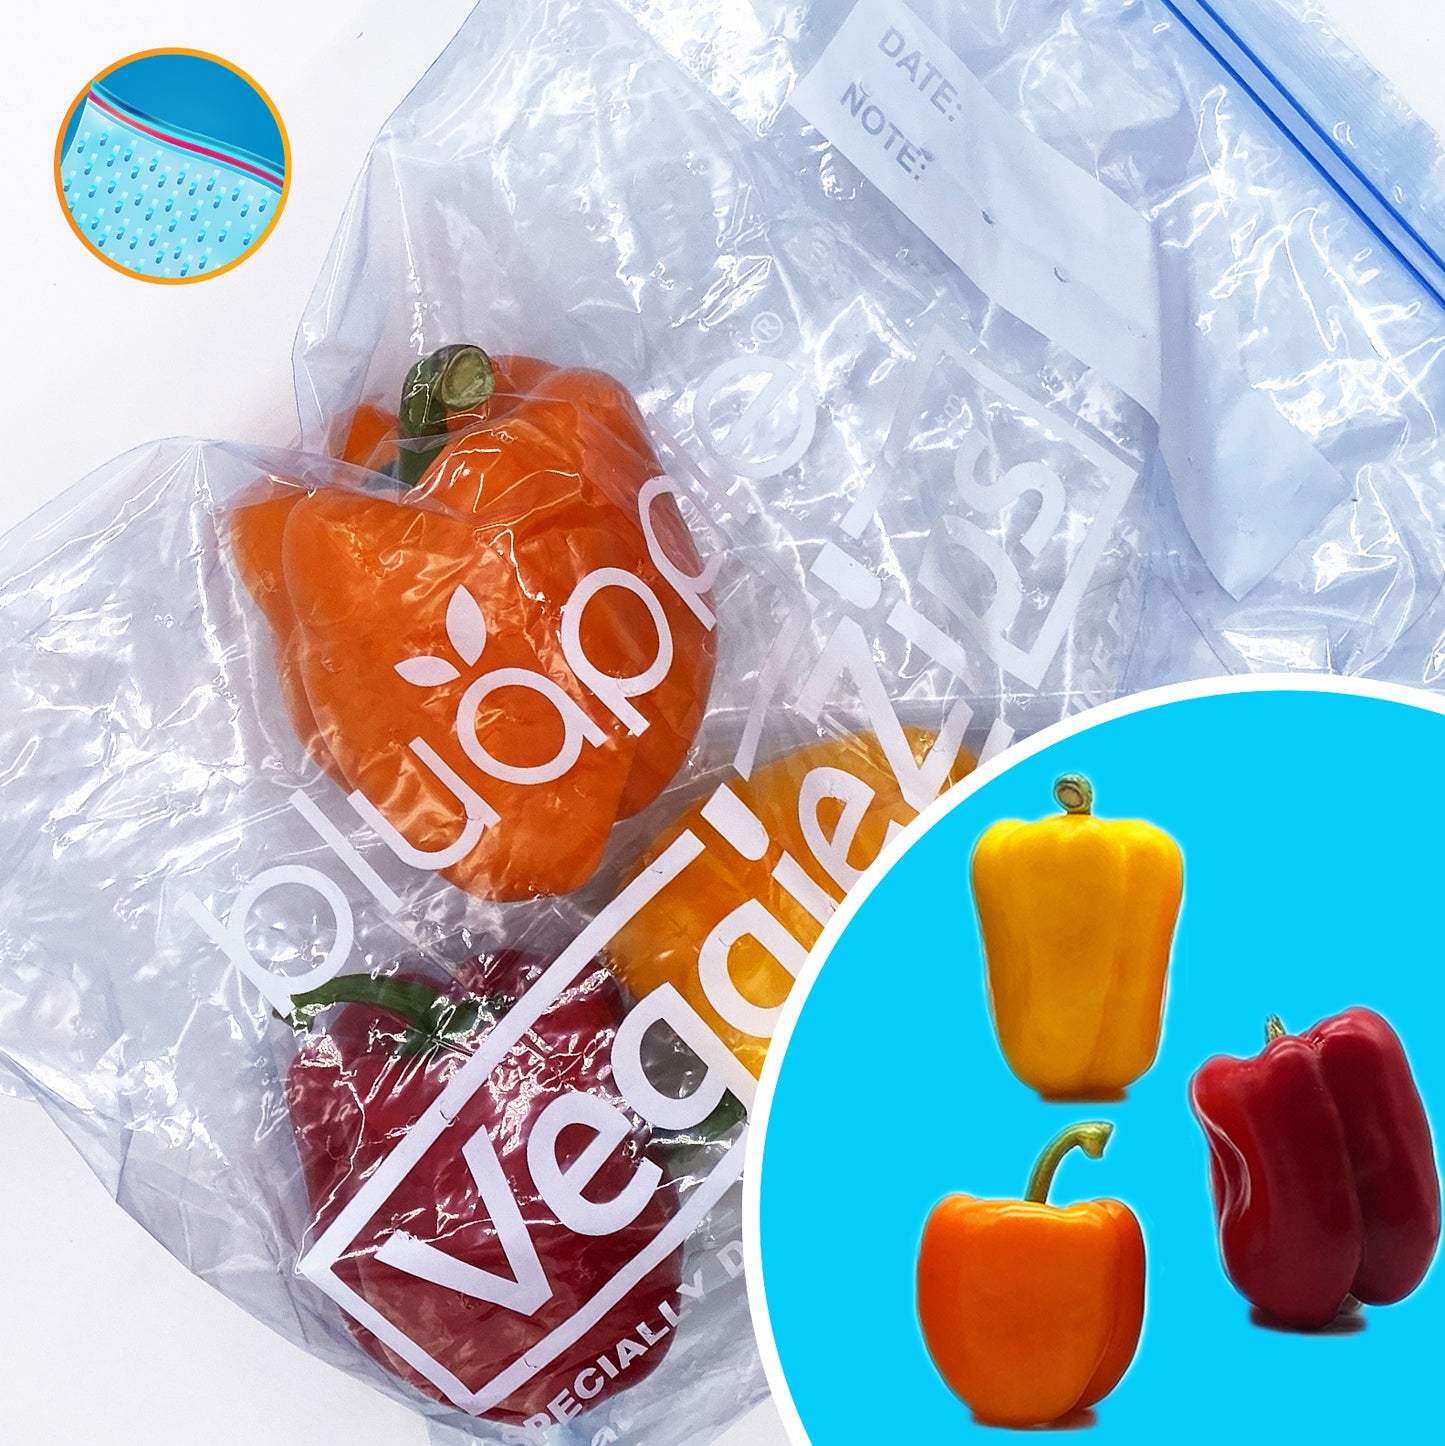 VeggieZips® with HydroLiners® 20-Pack